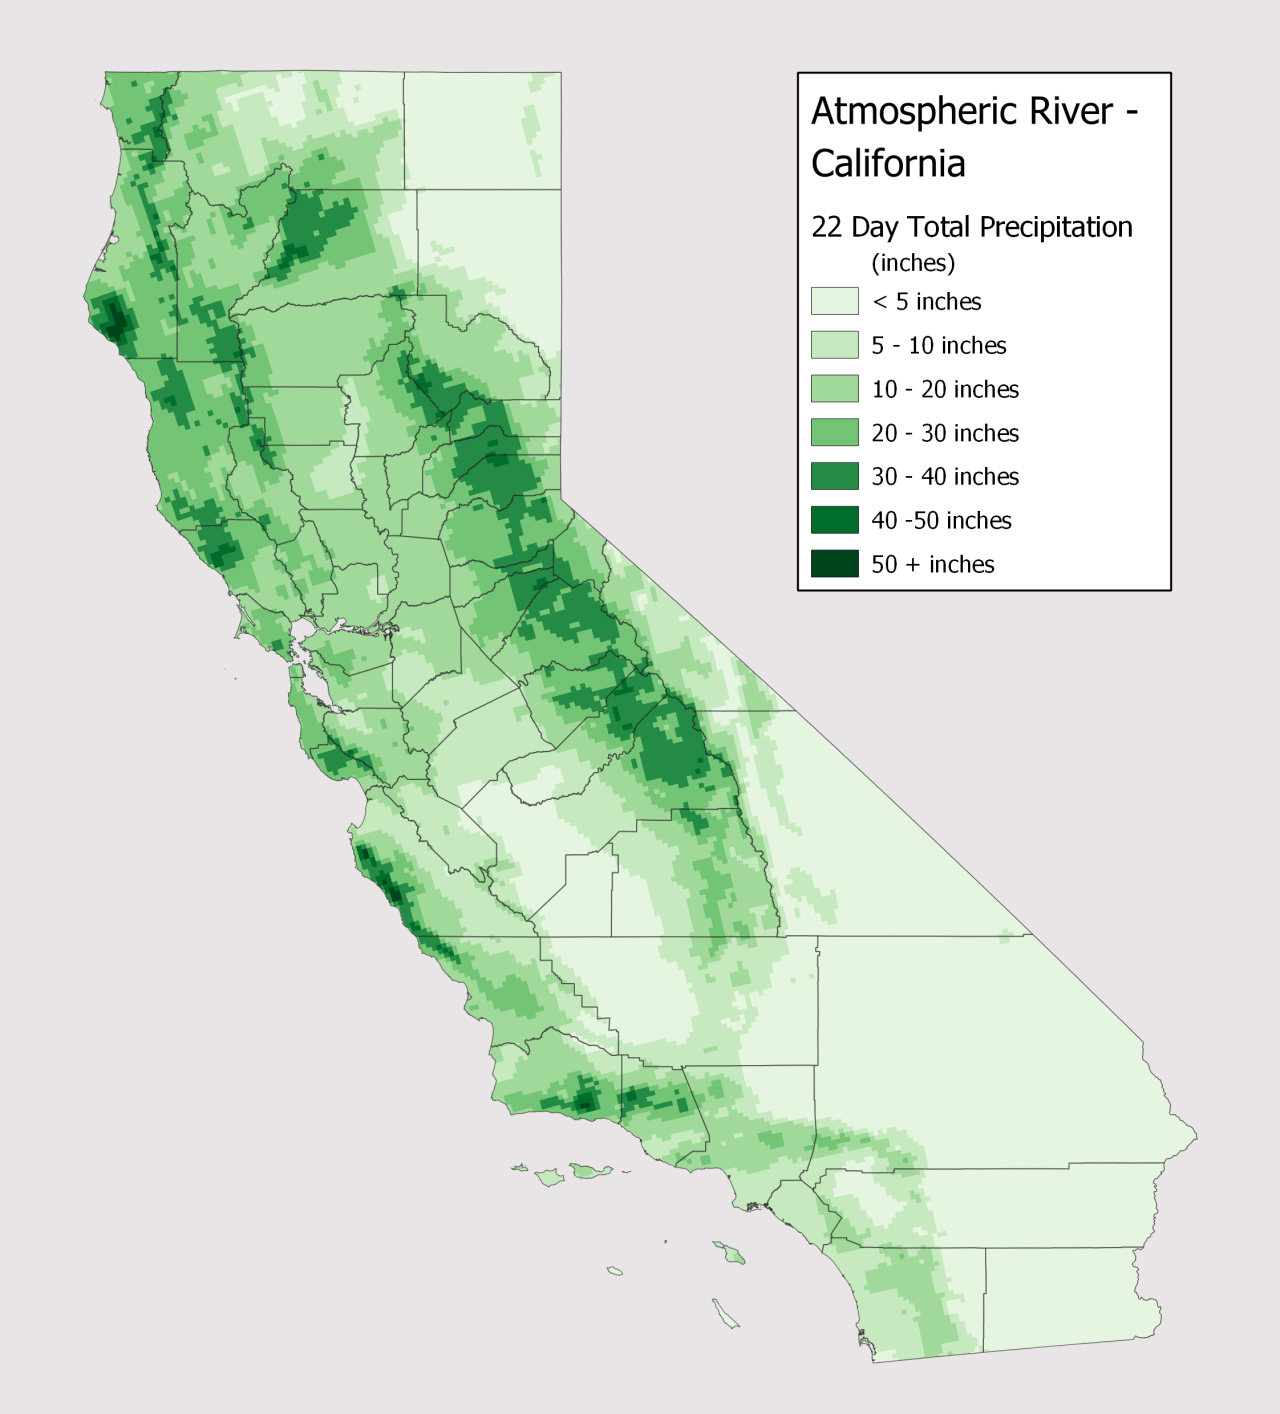 Total precipitation of 2023 Atmospheric River event in California. Source: NWS and Guy Carpenter